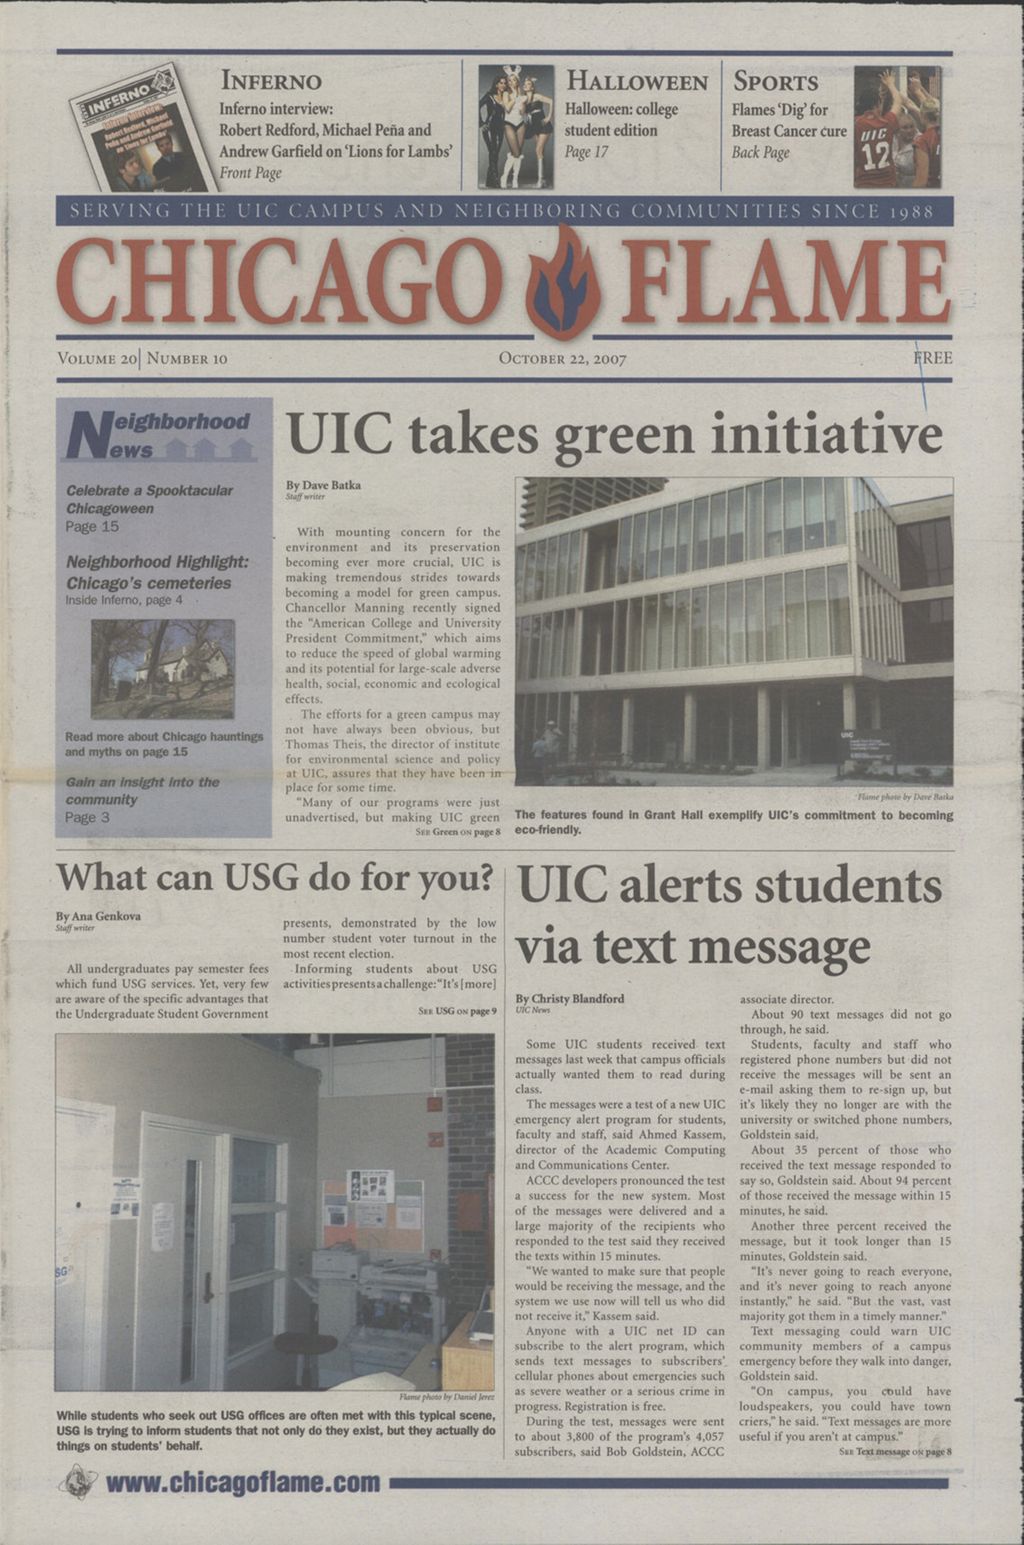 Miniature of Chicago Flame (October 22, 2007)